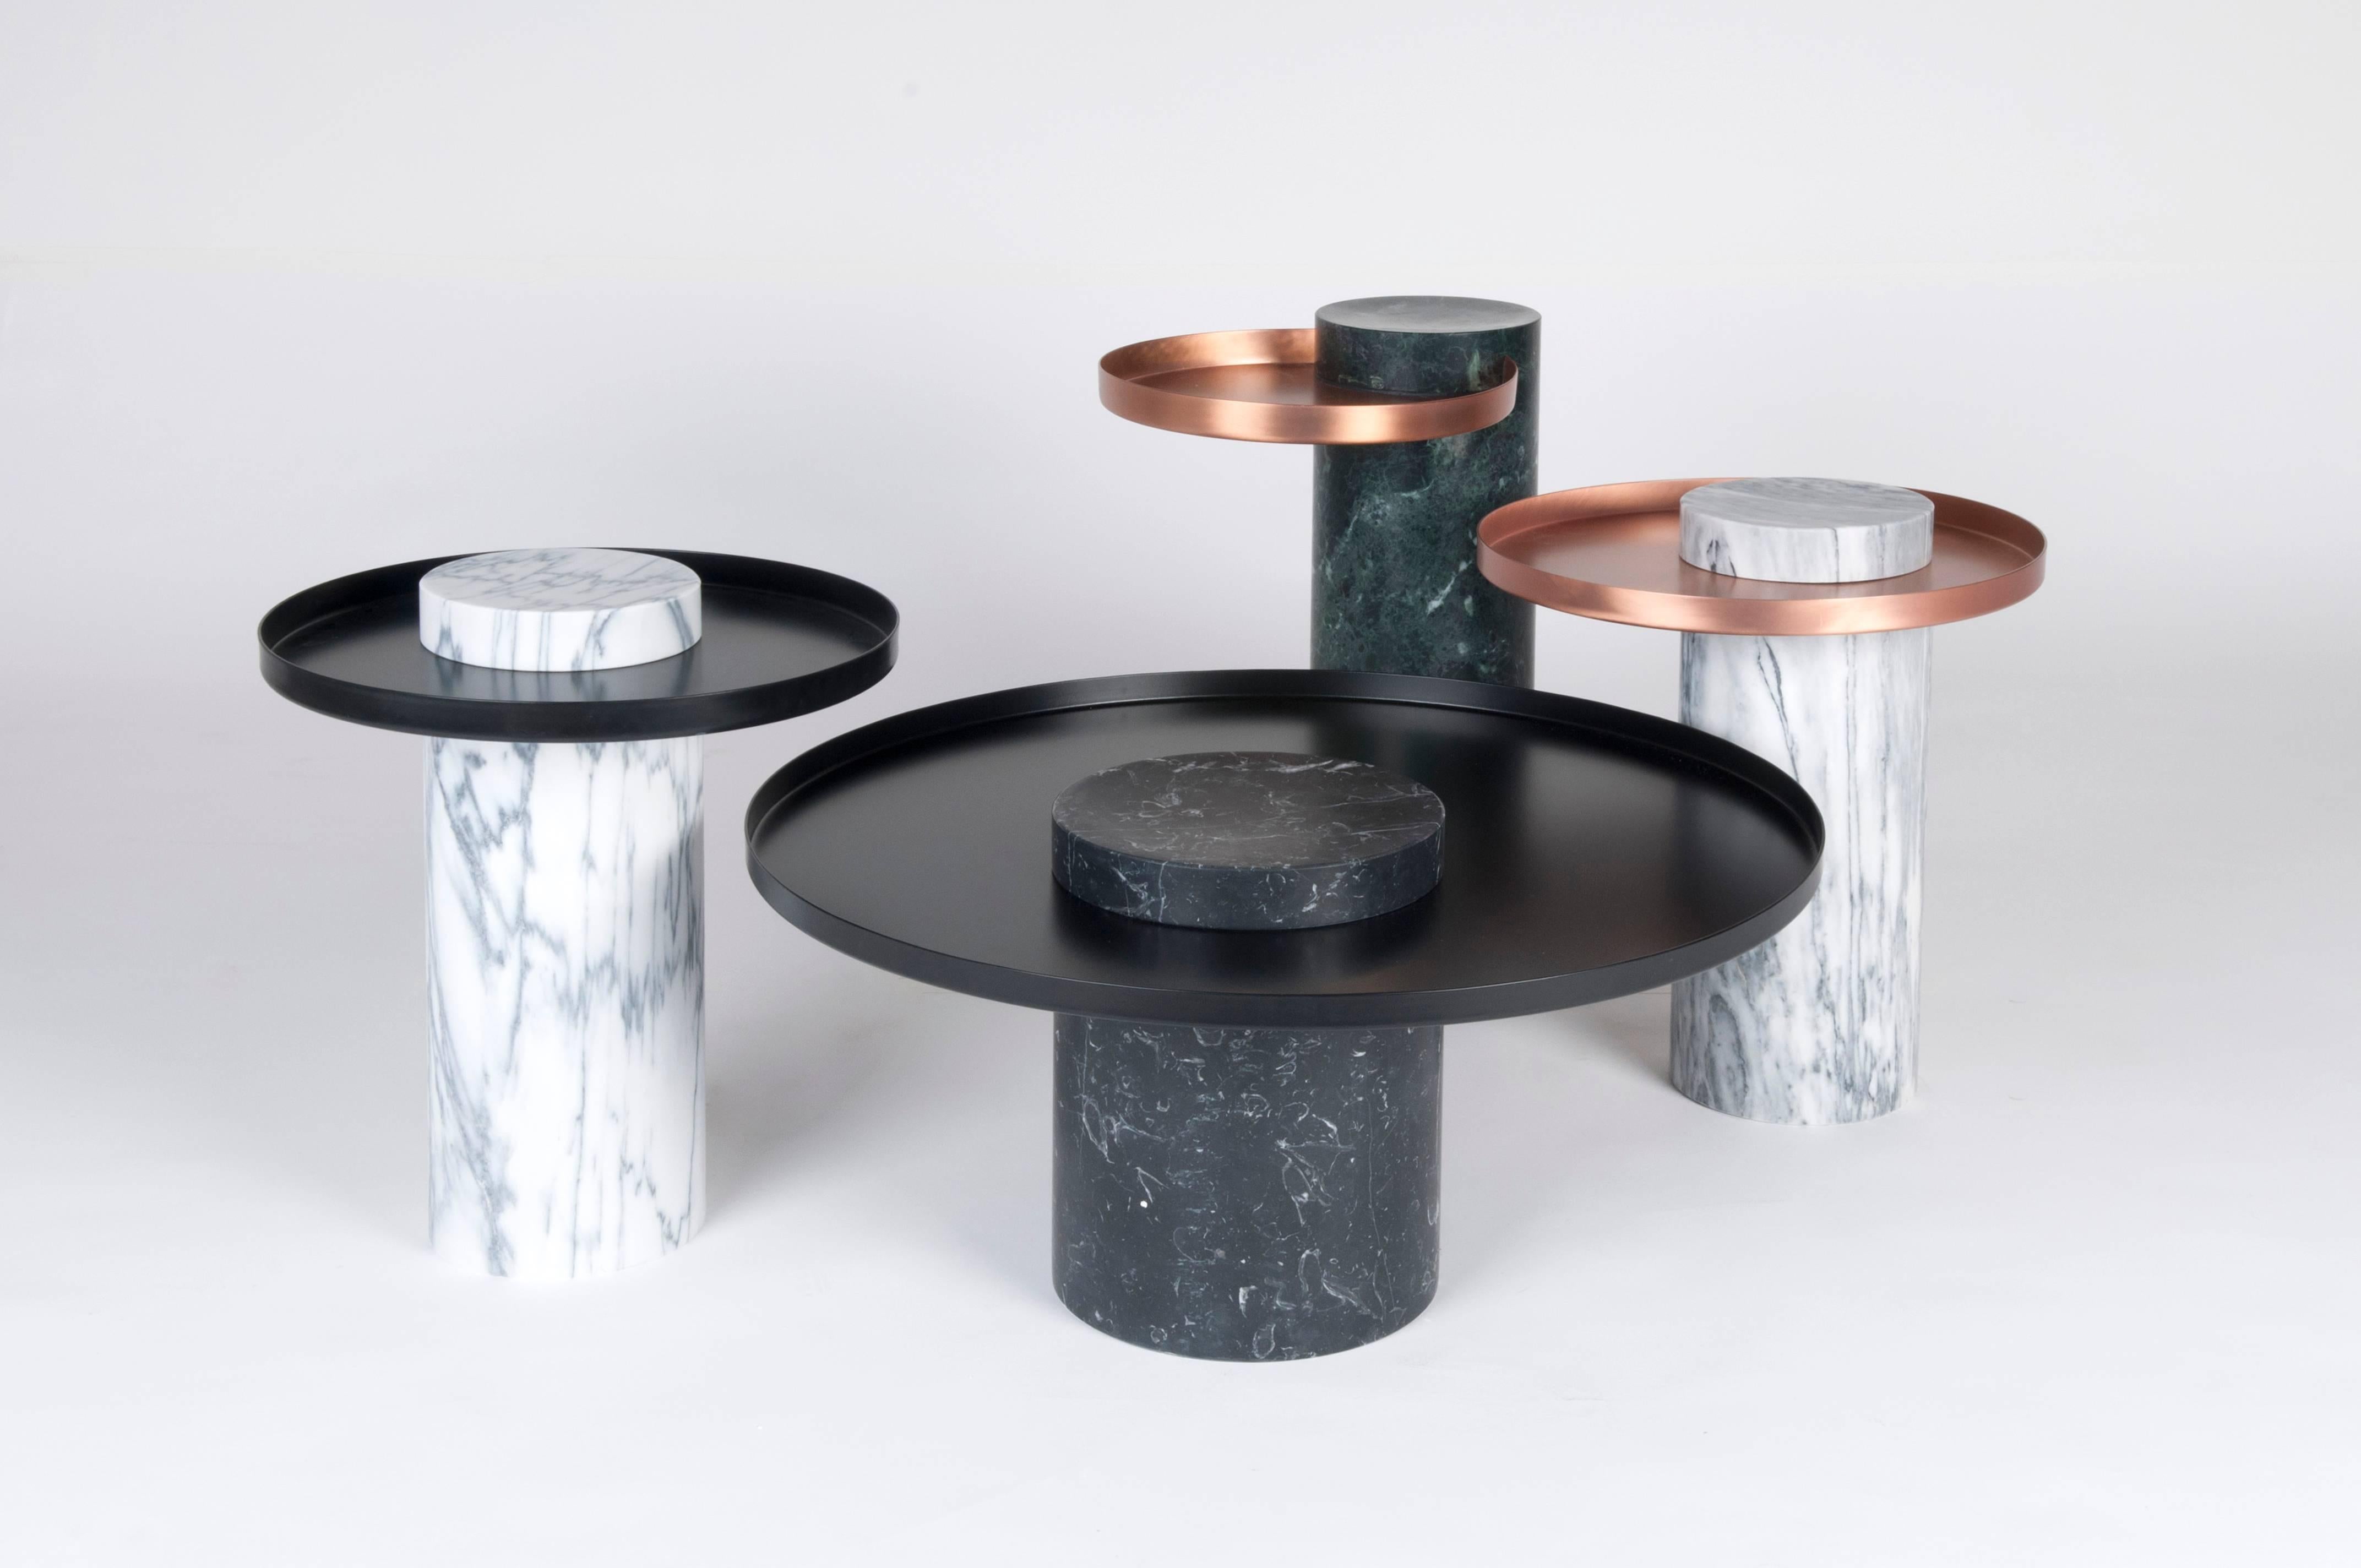 Low indian green marble contemporary guéridon, Sebastian Herkner.
Dimensions: D 70 x H 33 cm.
Materials: Indian green marble, copper.

The salute table exists in 3 sizes, 4 different marble stones for the column and 5 different finishes for the